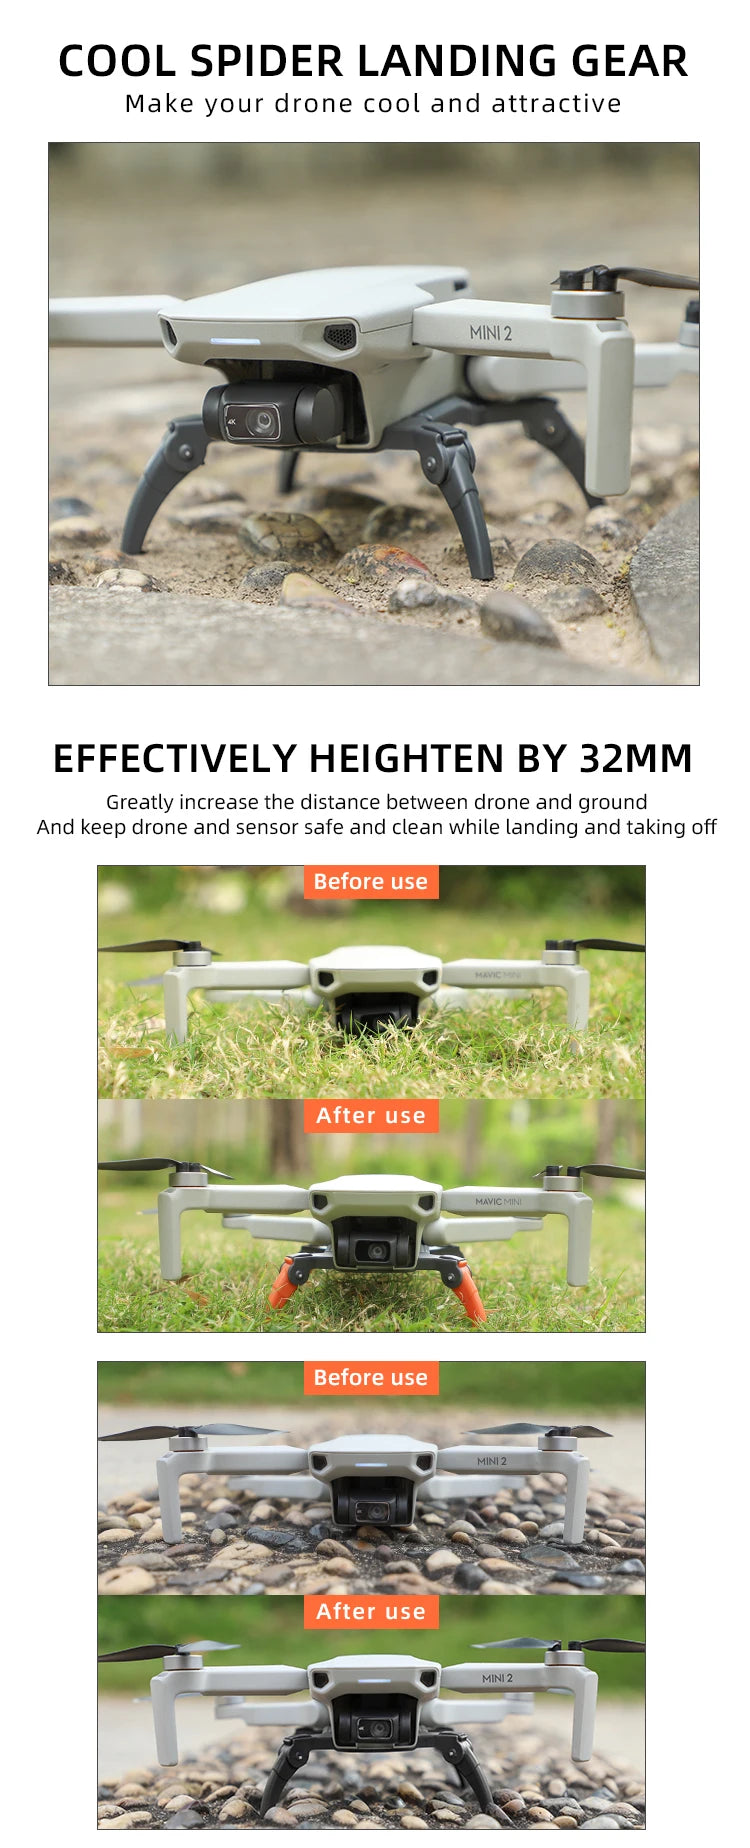 MINI 2 EFFECTIVELY HEIGHTEN BY 32MM Keep drone and sensor